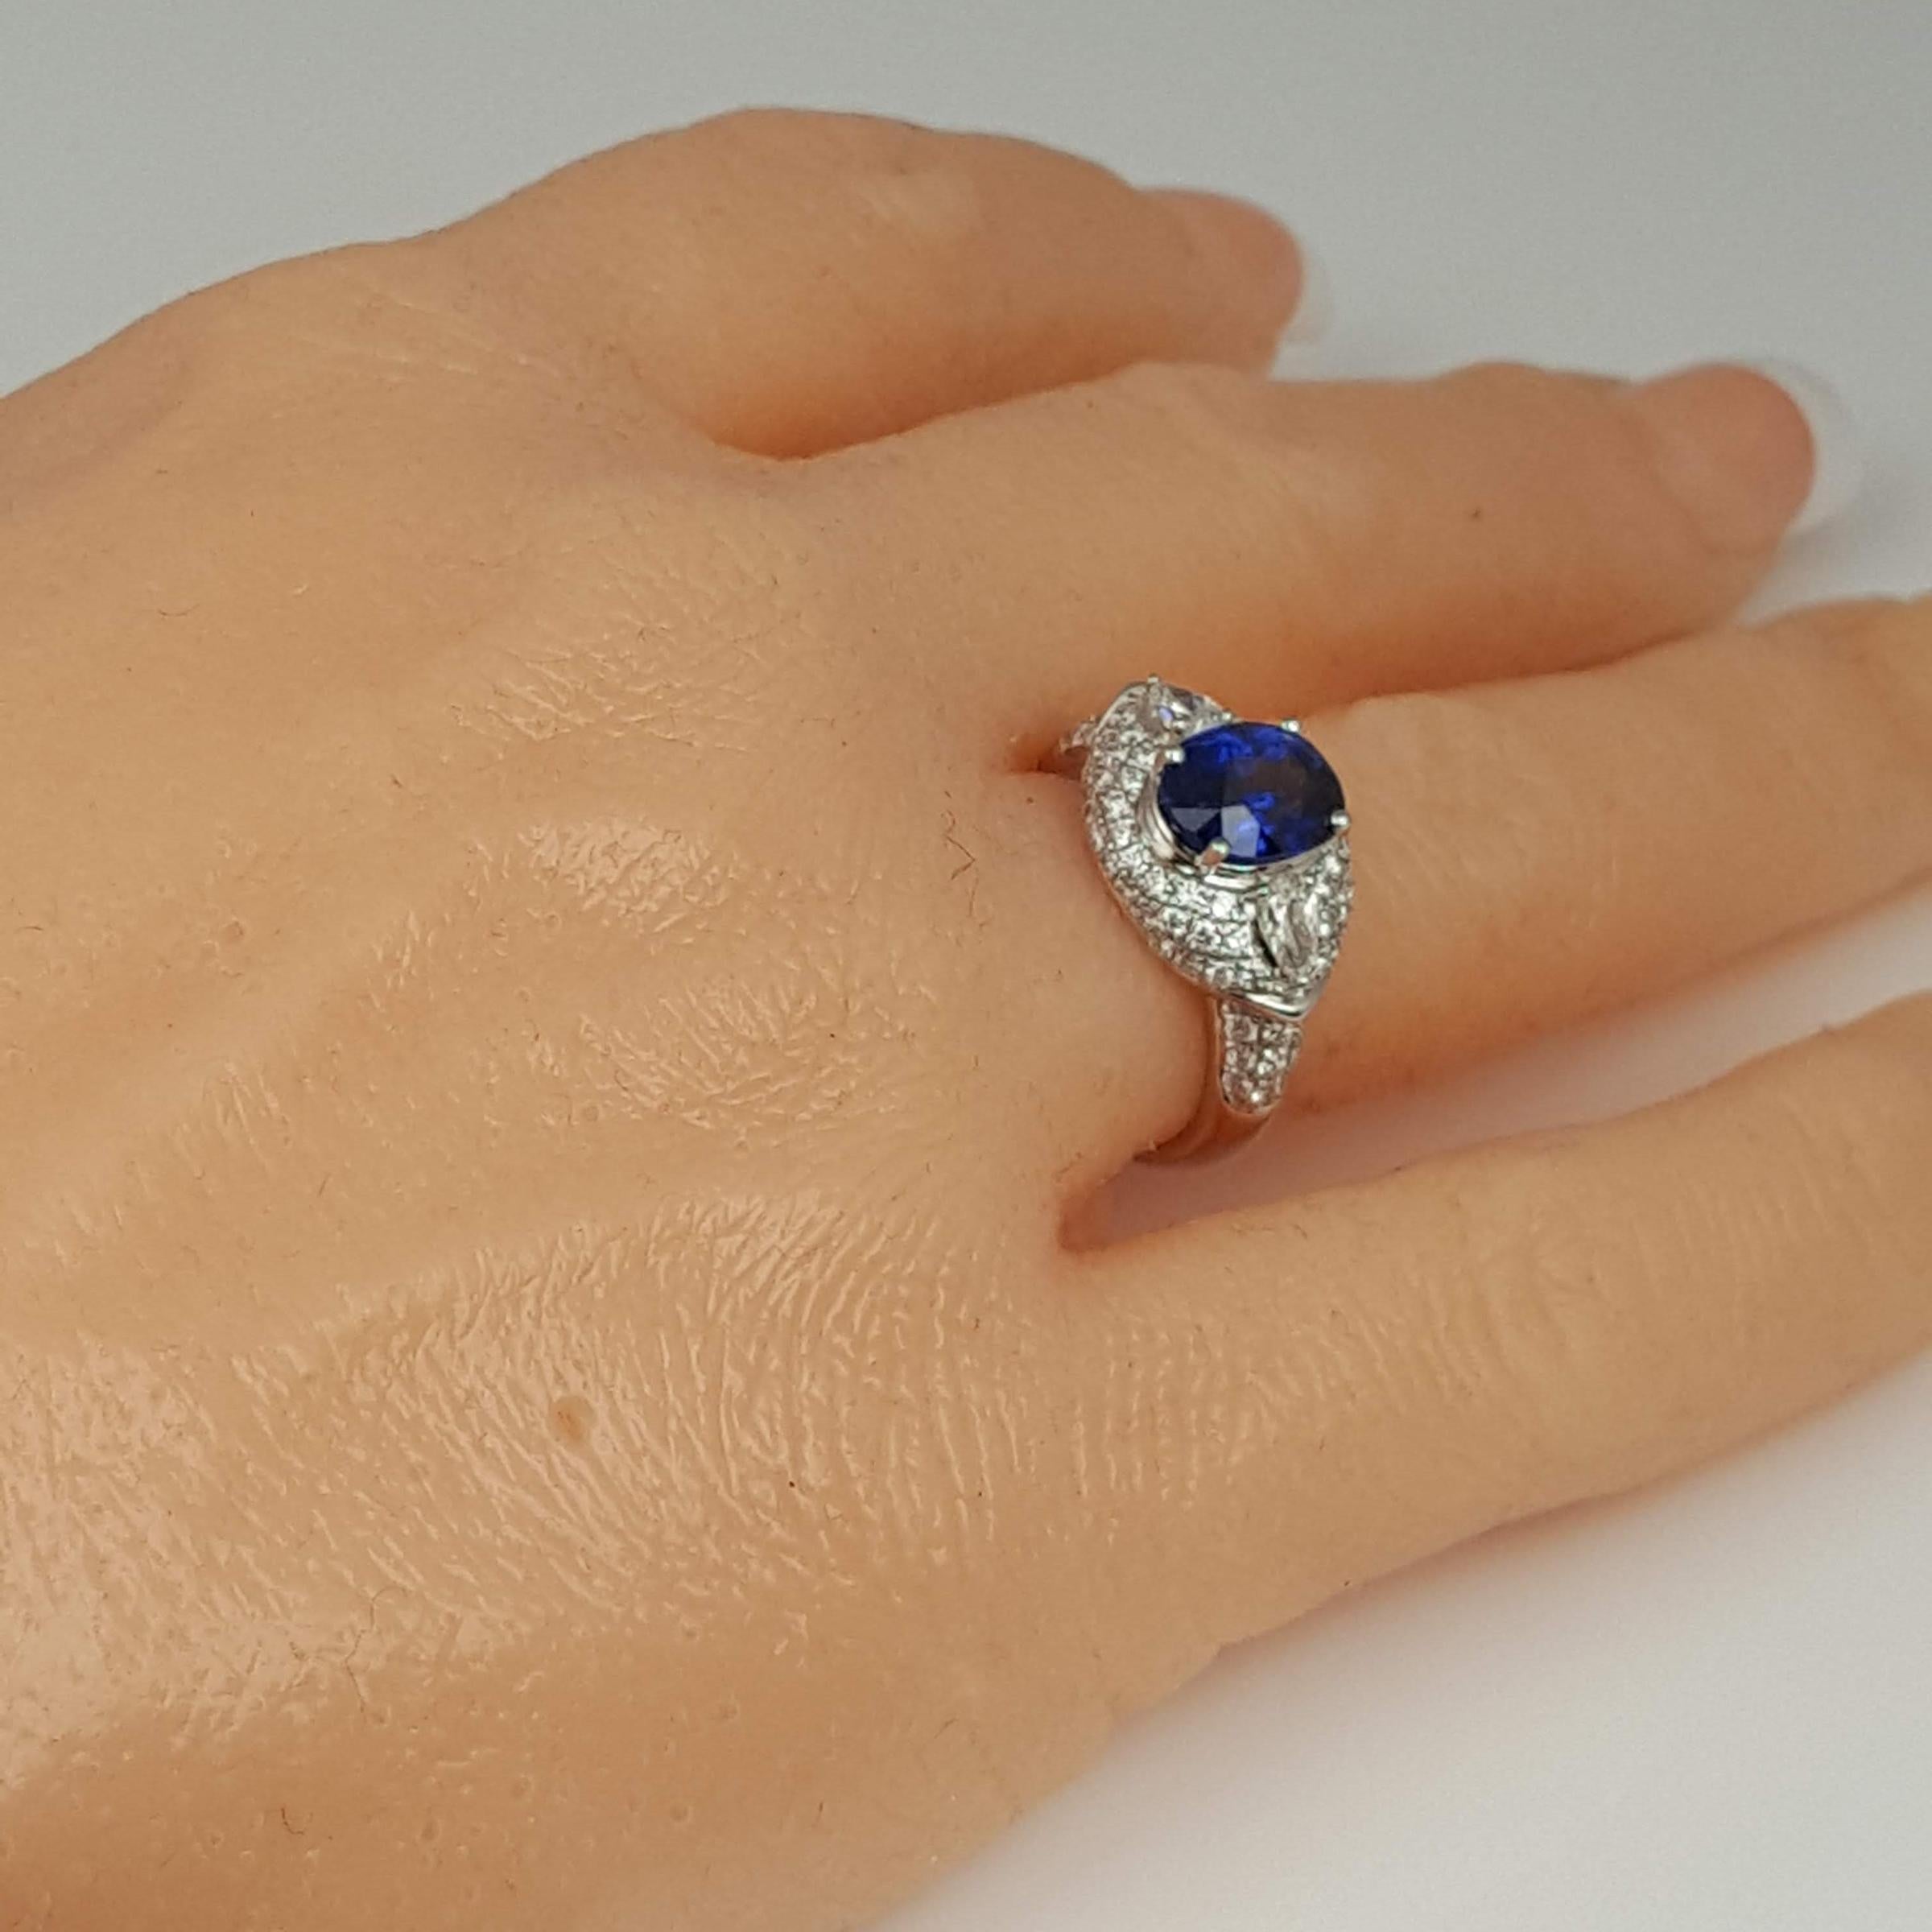 GIA Certified 3.04 Carat Oval Ceylon Sapphire and Natural Diamond Ring ref780 For Sale 1